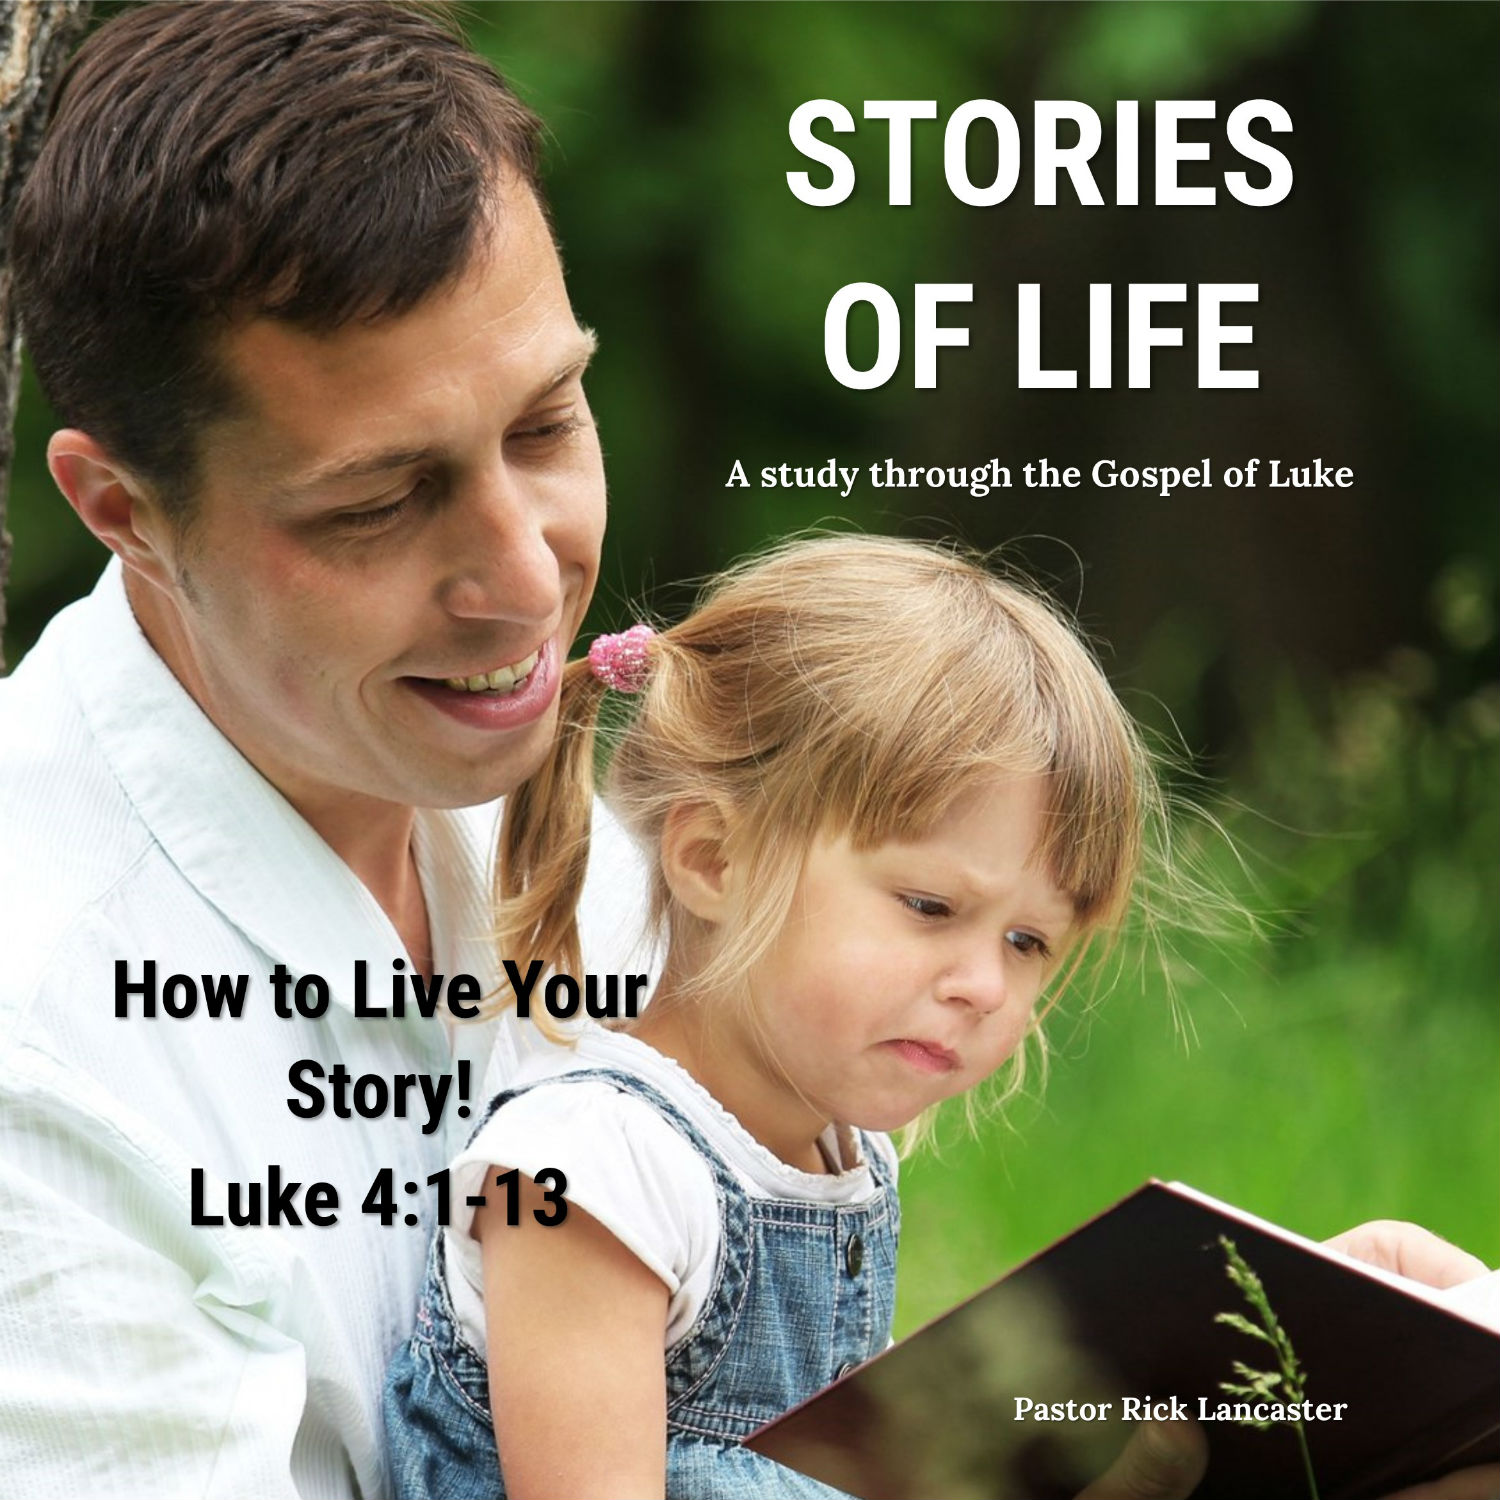 How to Live Your Story! – Luke 4:1-13